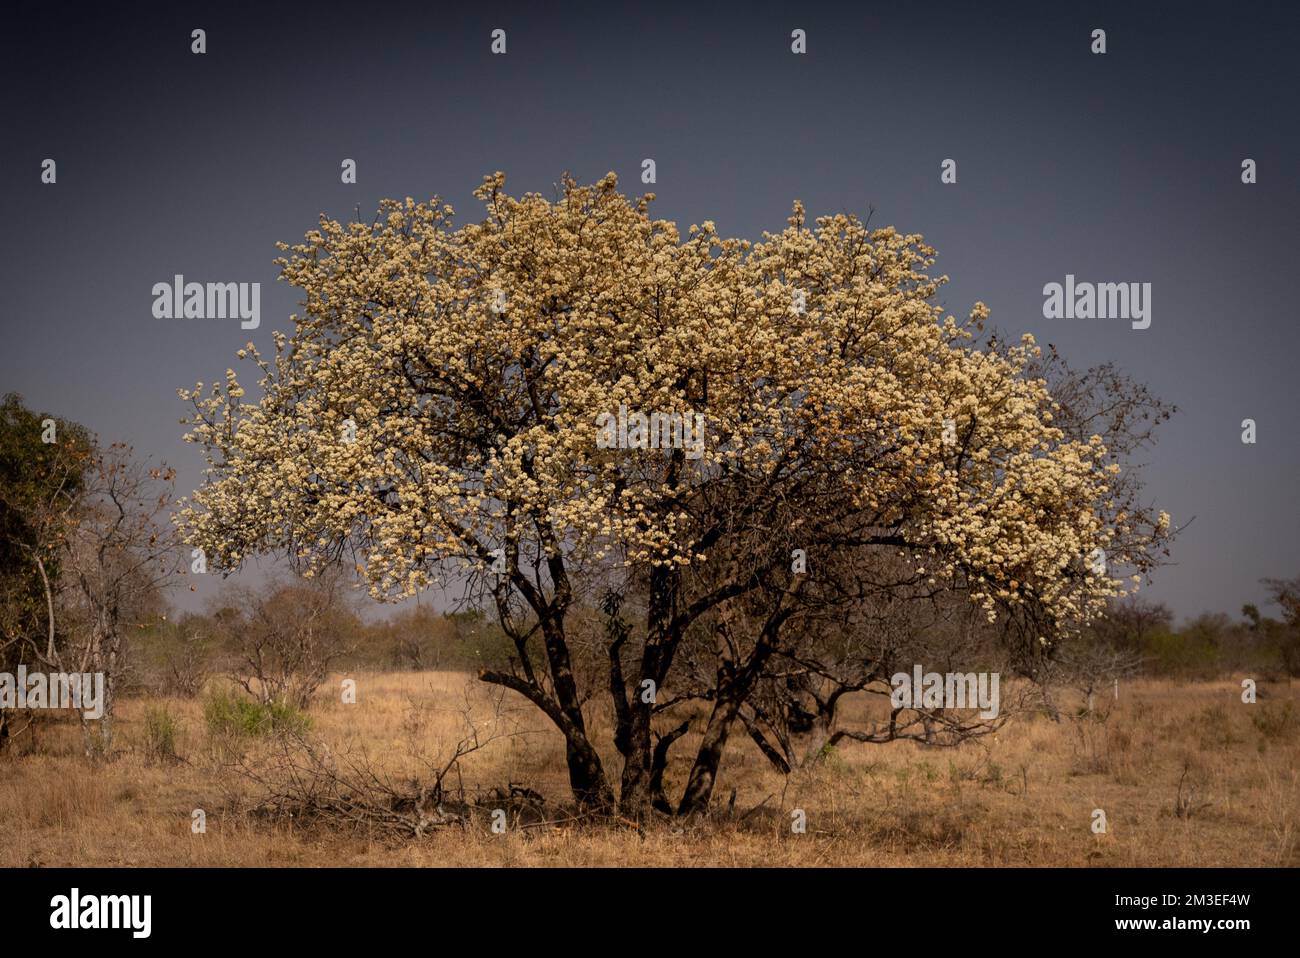 A beautiful wild pear tree in the Bushveld region of South Africa Stock Photo